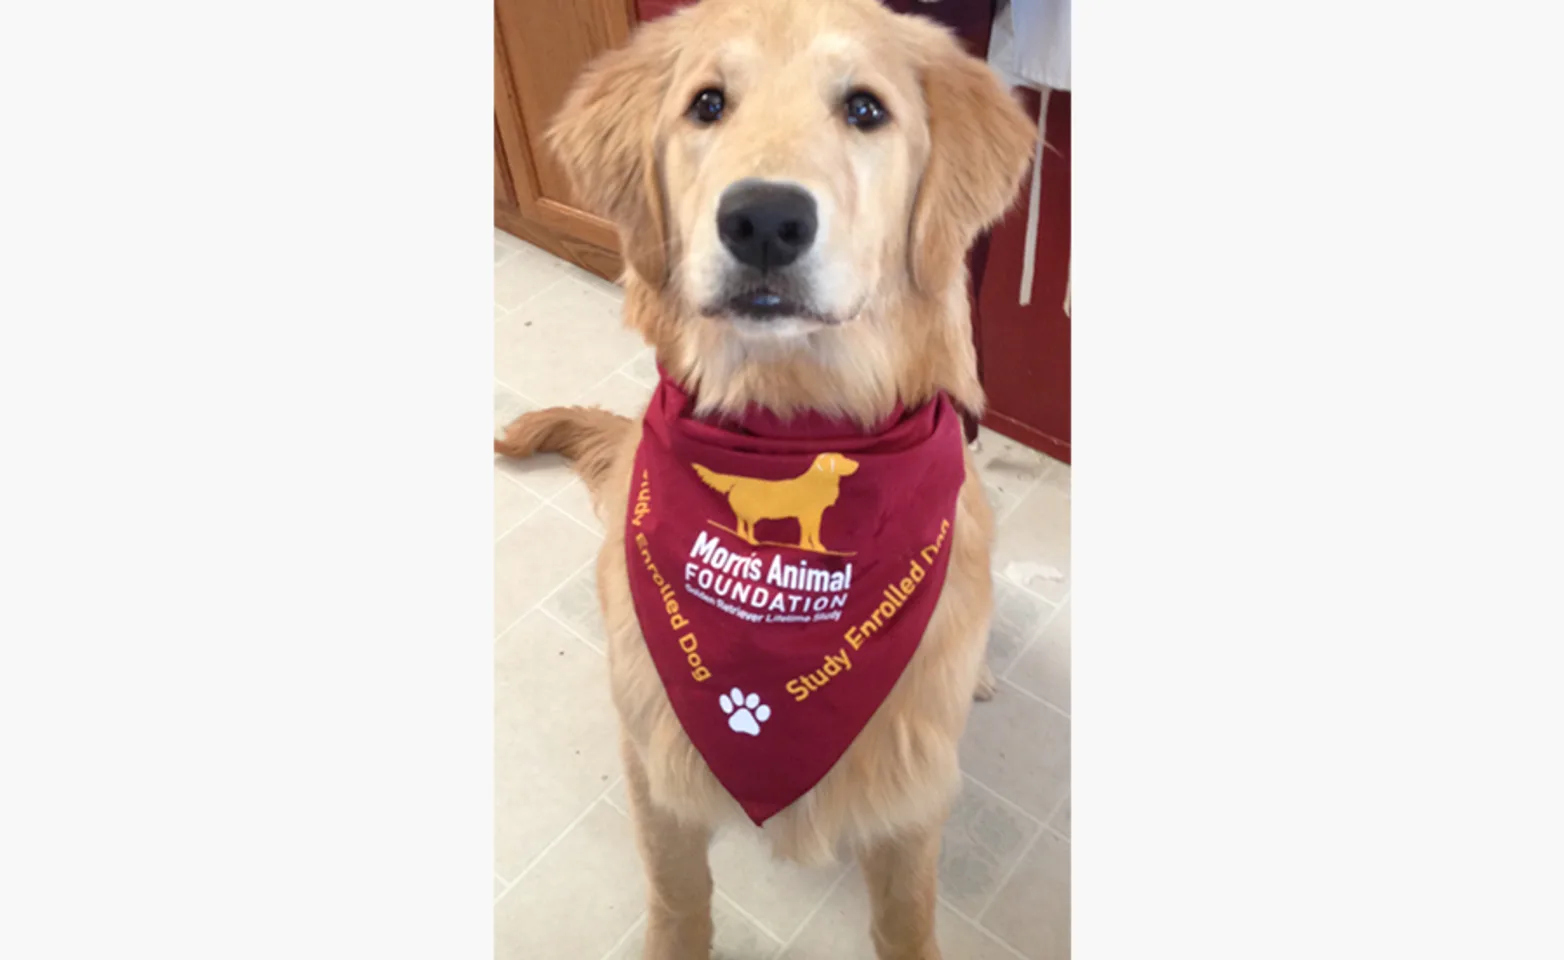 Willow the golden retriever wearing a red bandana around her neck